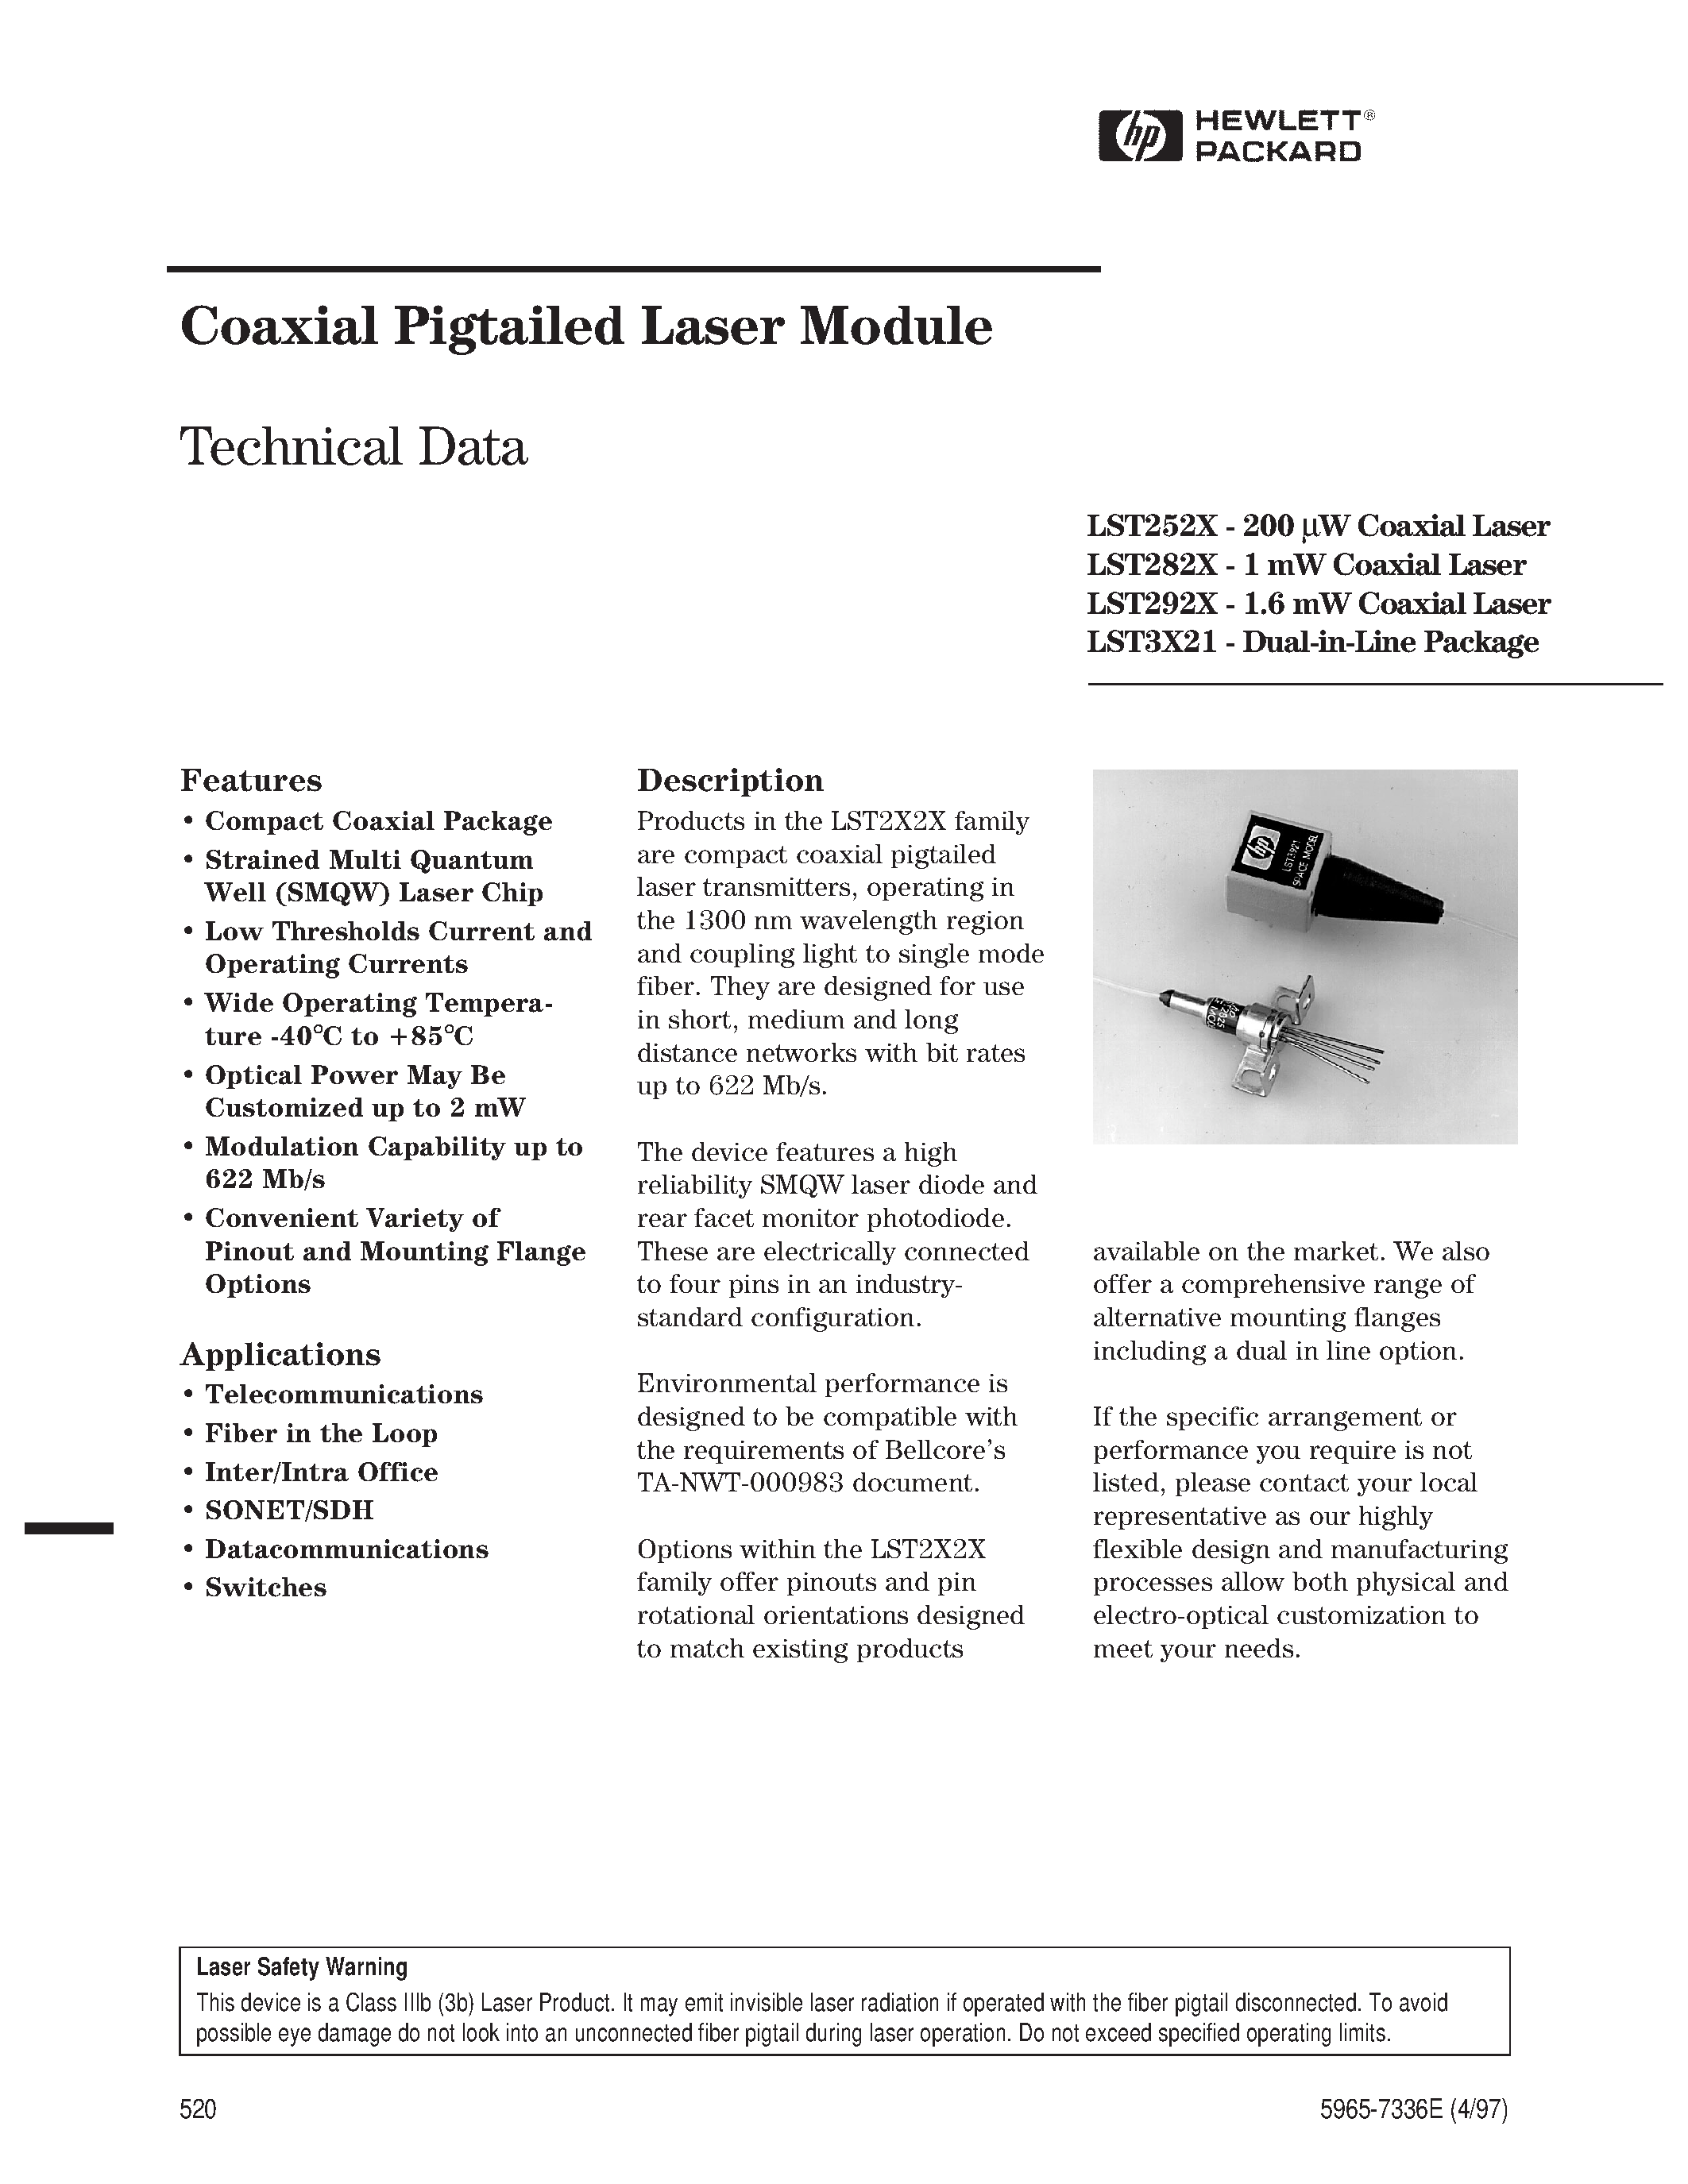 Даташит LST2525-S4-T-SF - Coaxial Pigtailed Laser Module страница 1